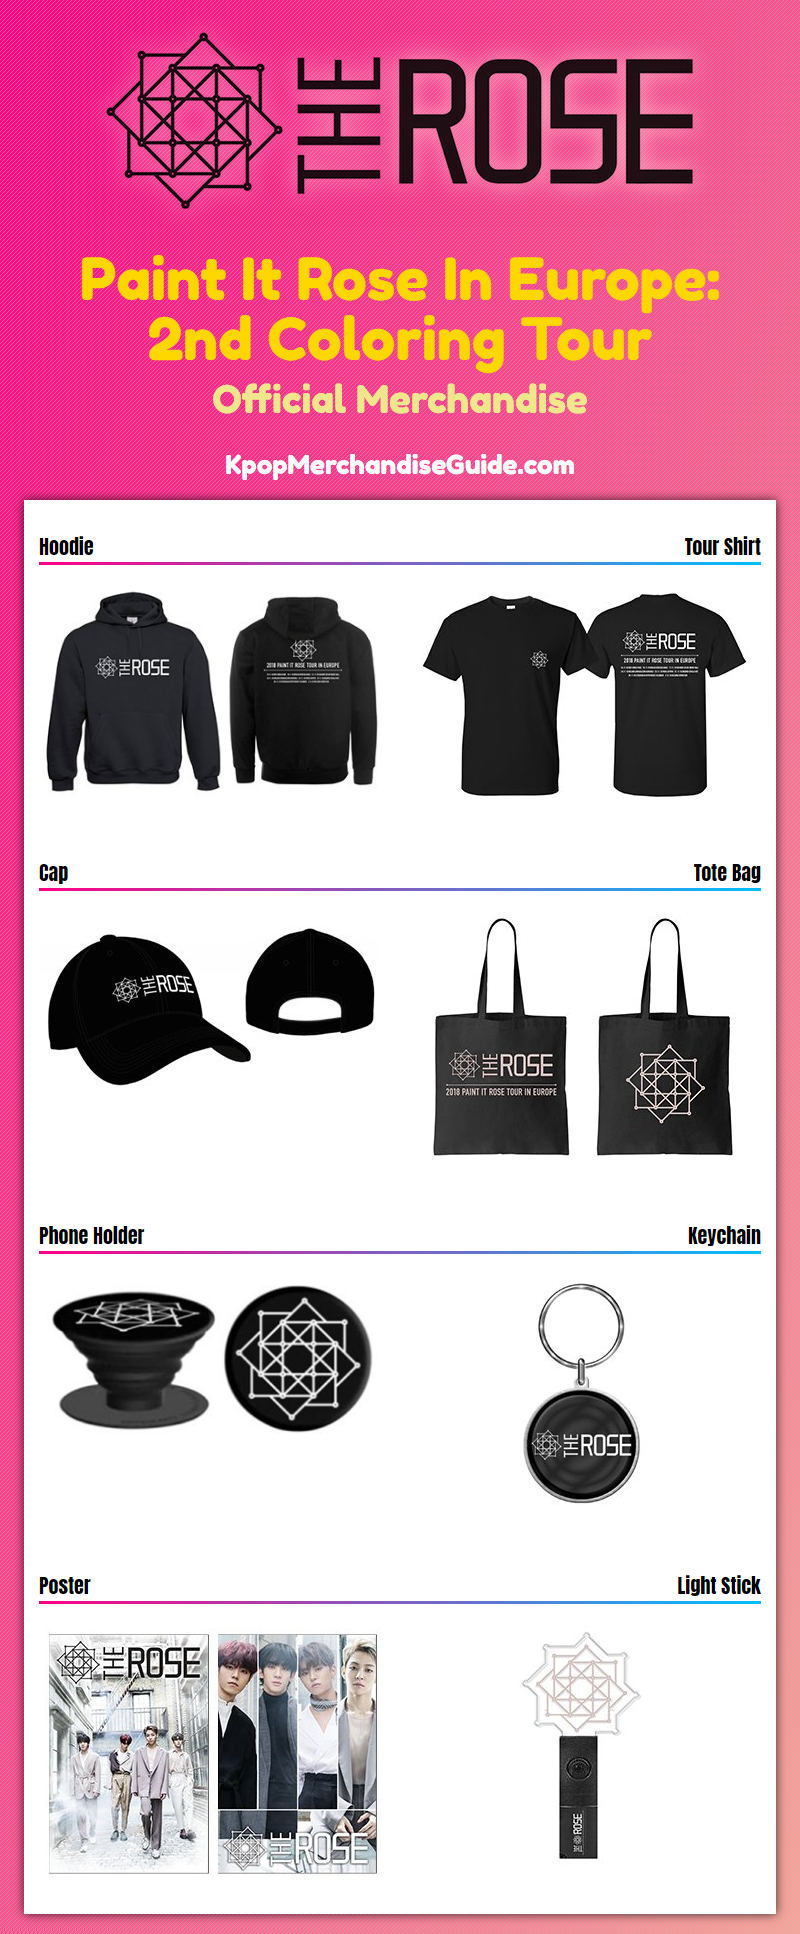 The Rose Paint It Rose in Europe: 2nd Coloring Tour Merchandise